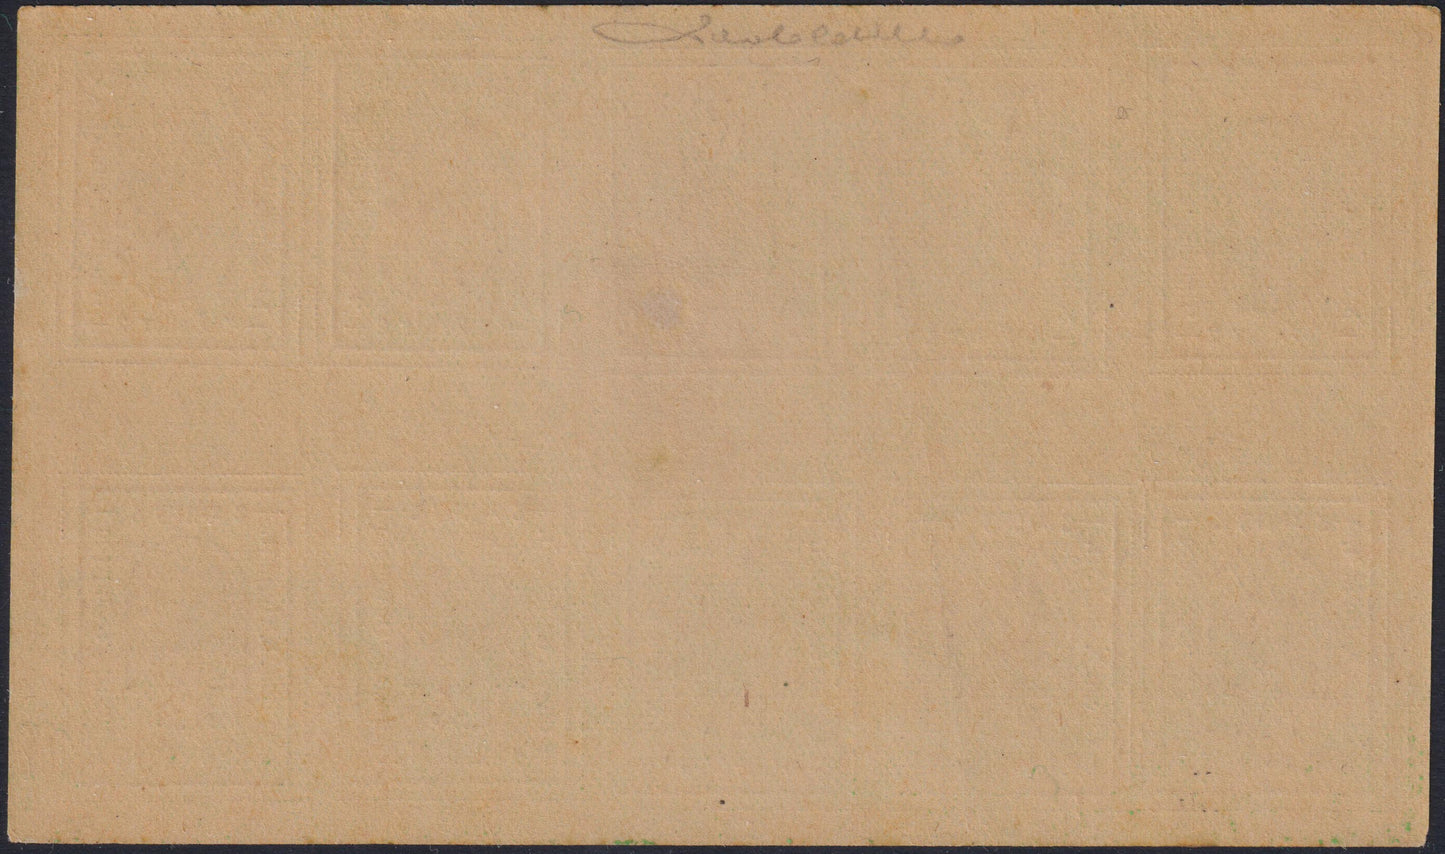 MER17 - Merano, 2 light green heller typographical print of the first type, minisheet of 10 copies, new with intact gum (4A).